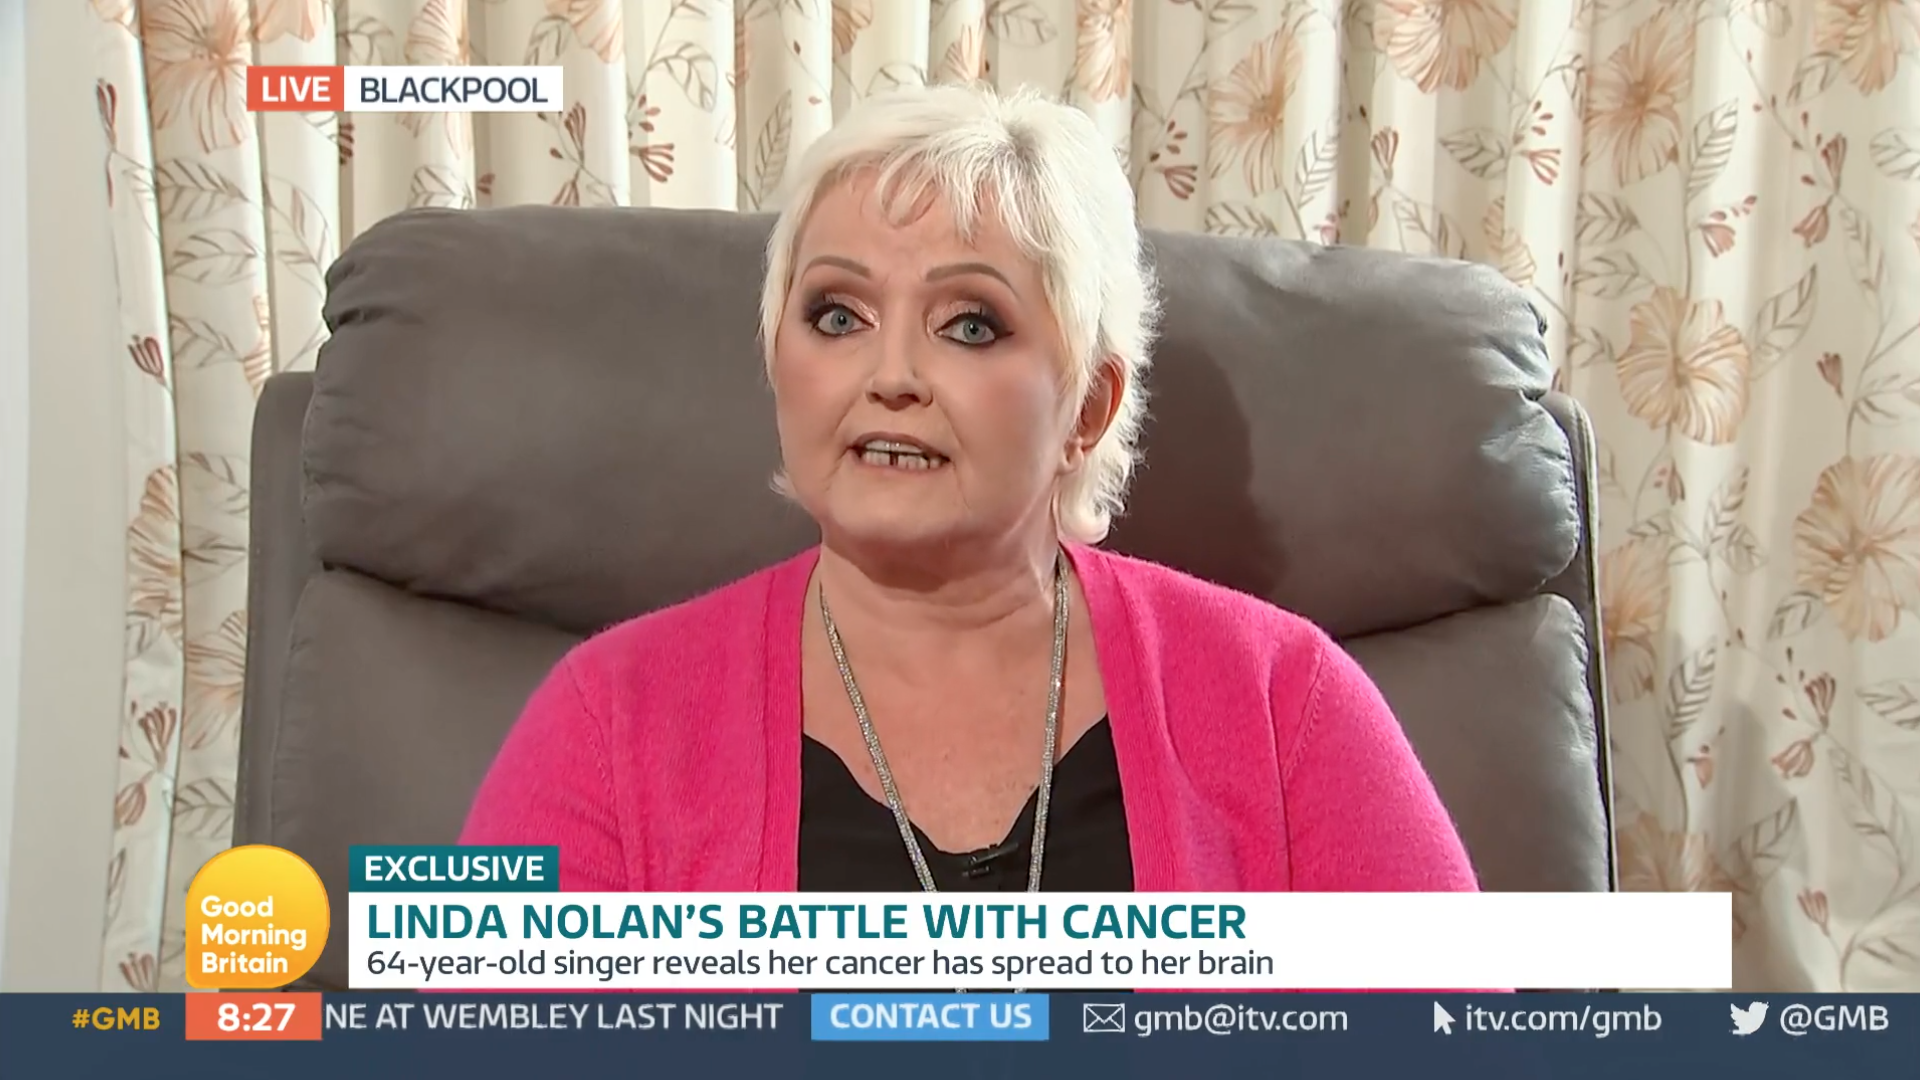 Linda Nolan 'devastated' as she shares update on battle with